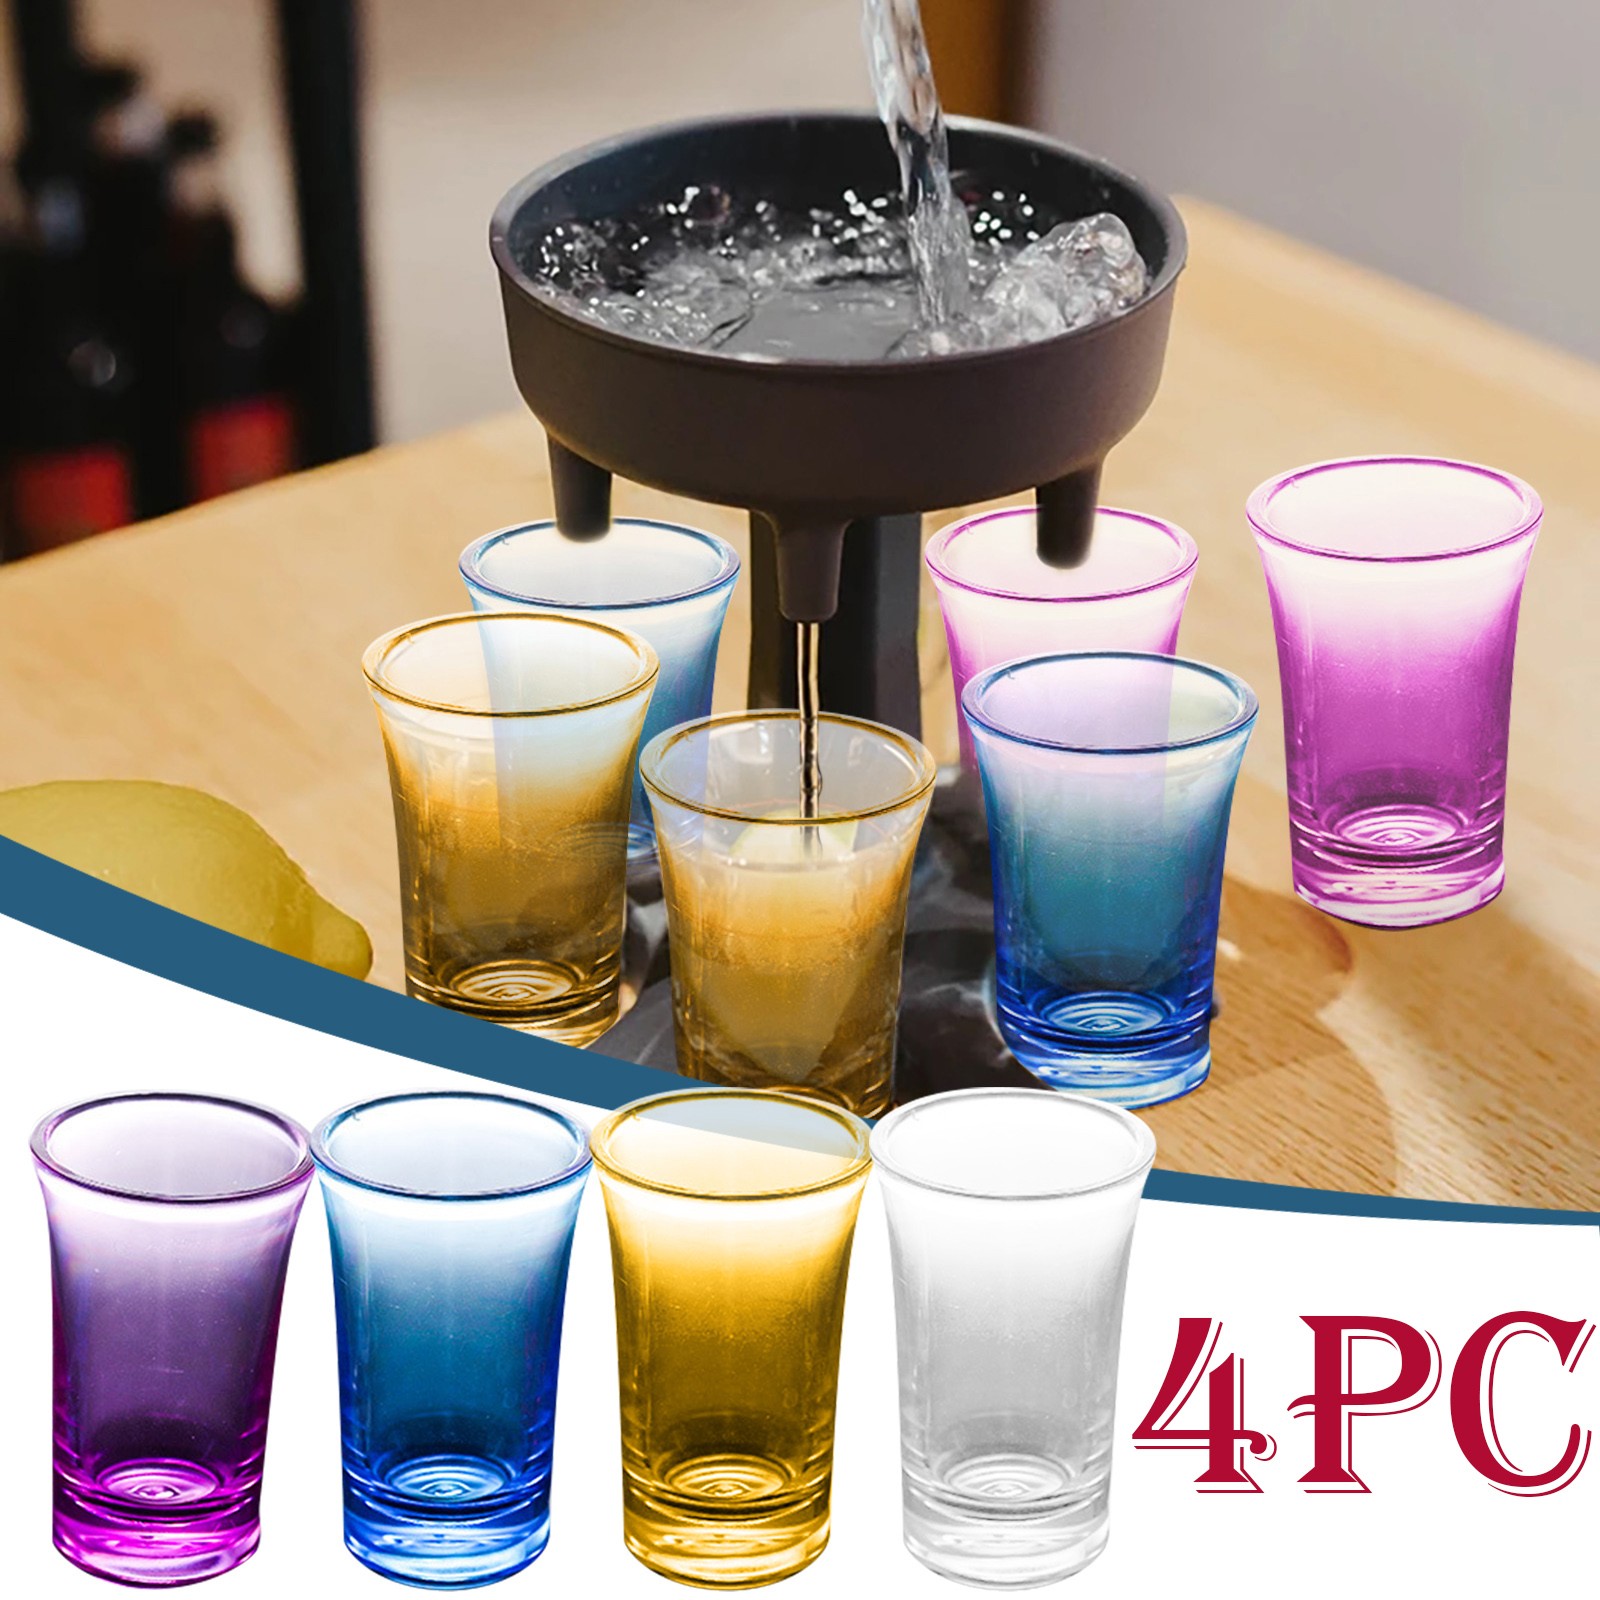 Acrylic Stemless Wine Glasses Cups and Water Tumblers Shatterproof Plastic Reusable Whisky Bar Cup Wine Glasses Cocktail Mug